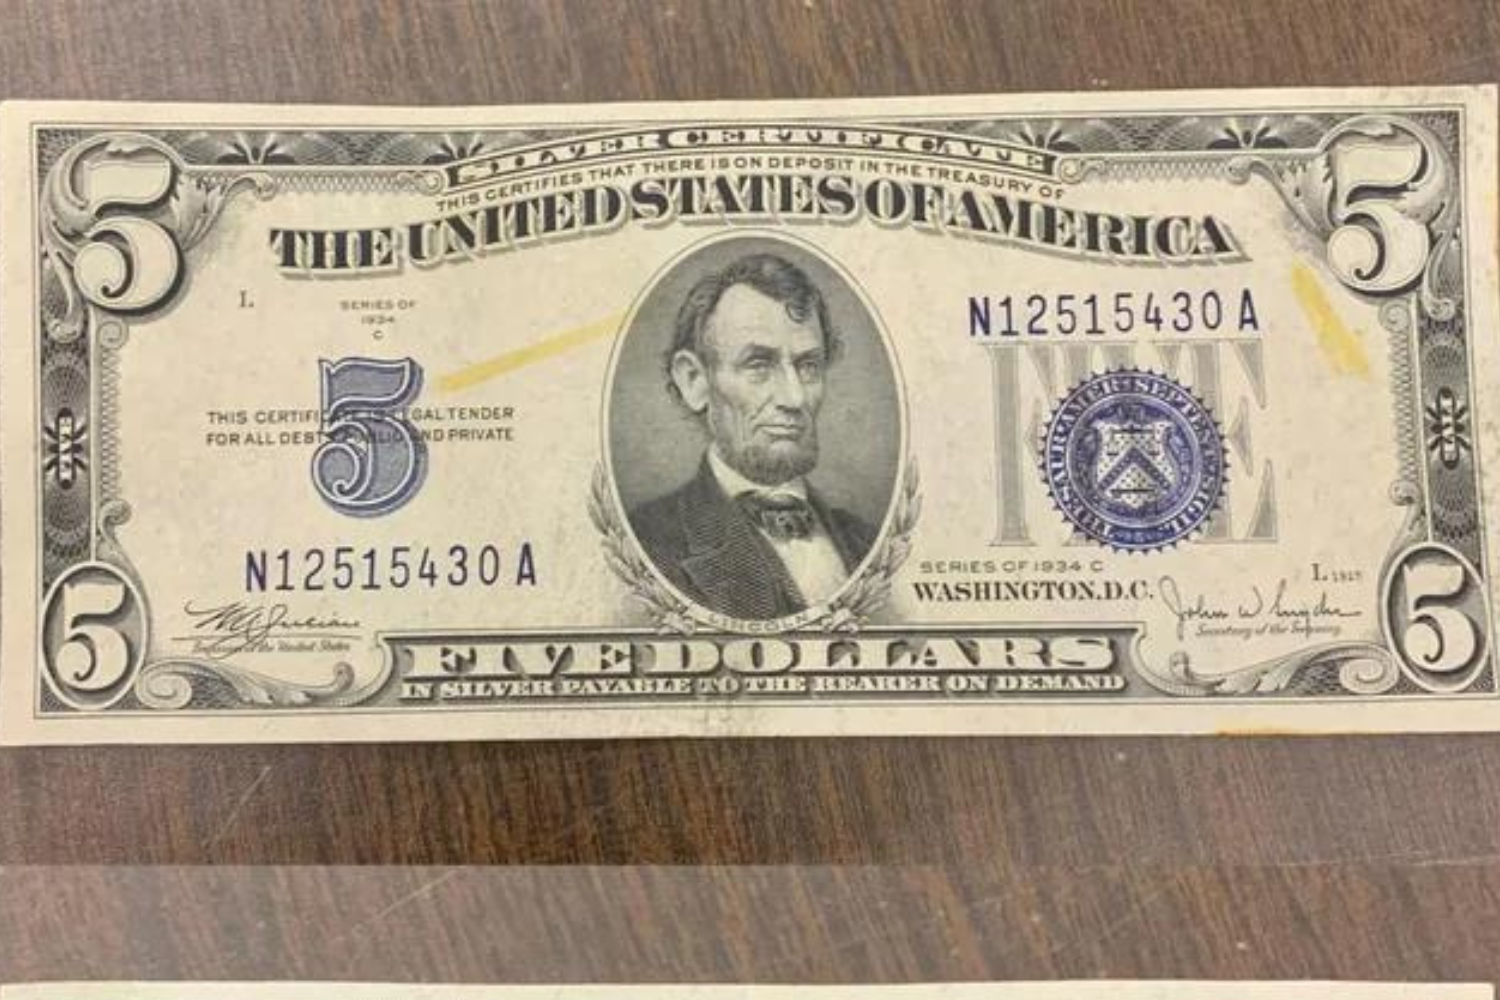 Shock as Customer Pays With Rare Silver Certificate Bill From 1930s